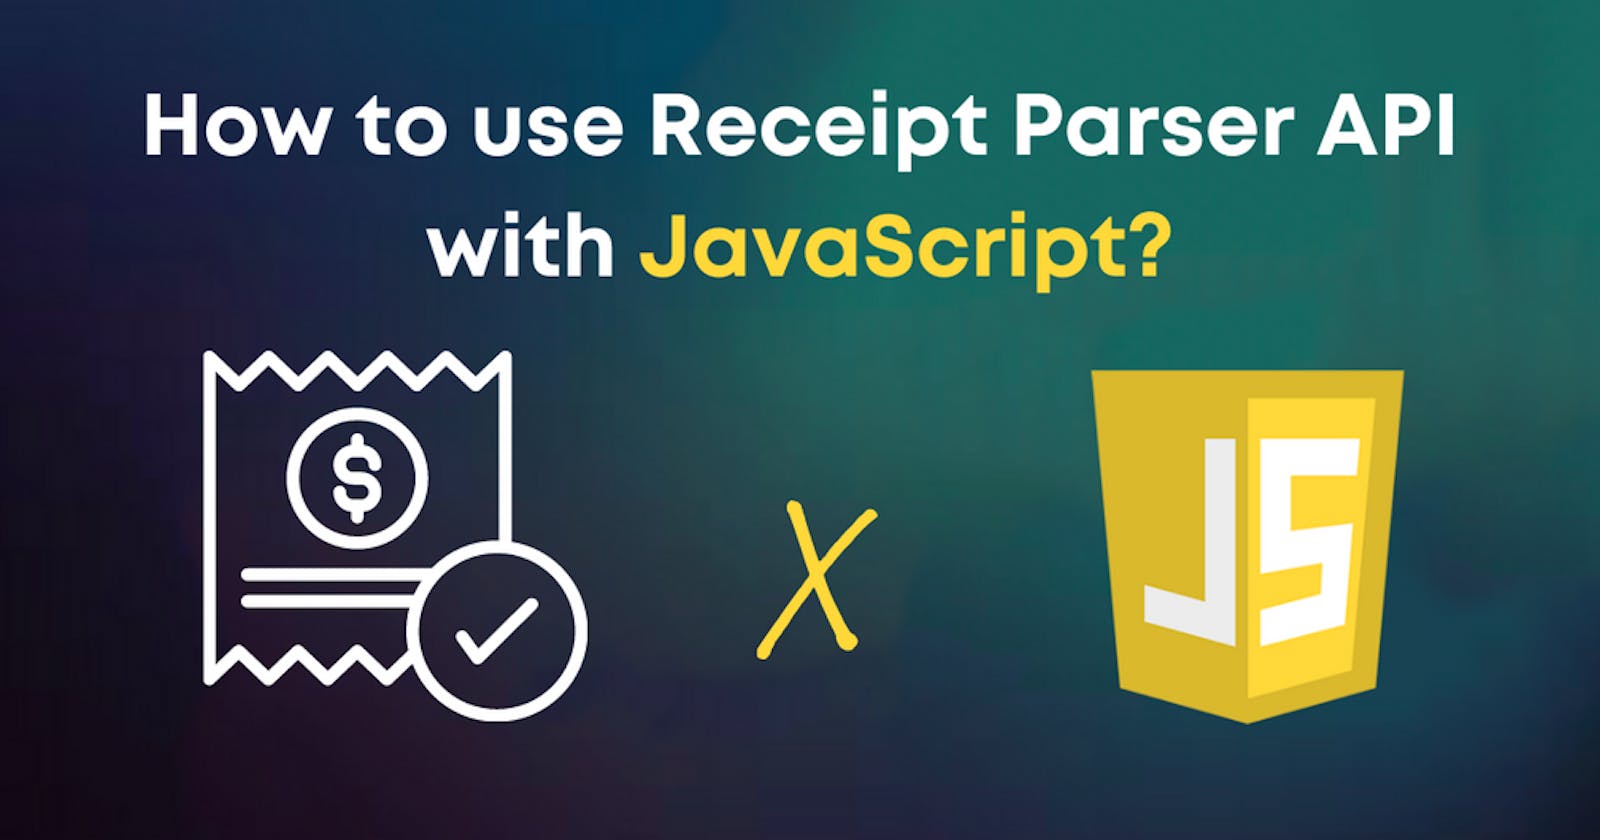 How to use Receipt Parsing API with JavaScript in 5 minutes?